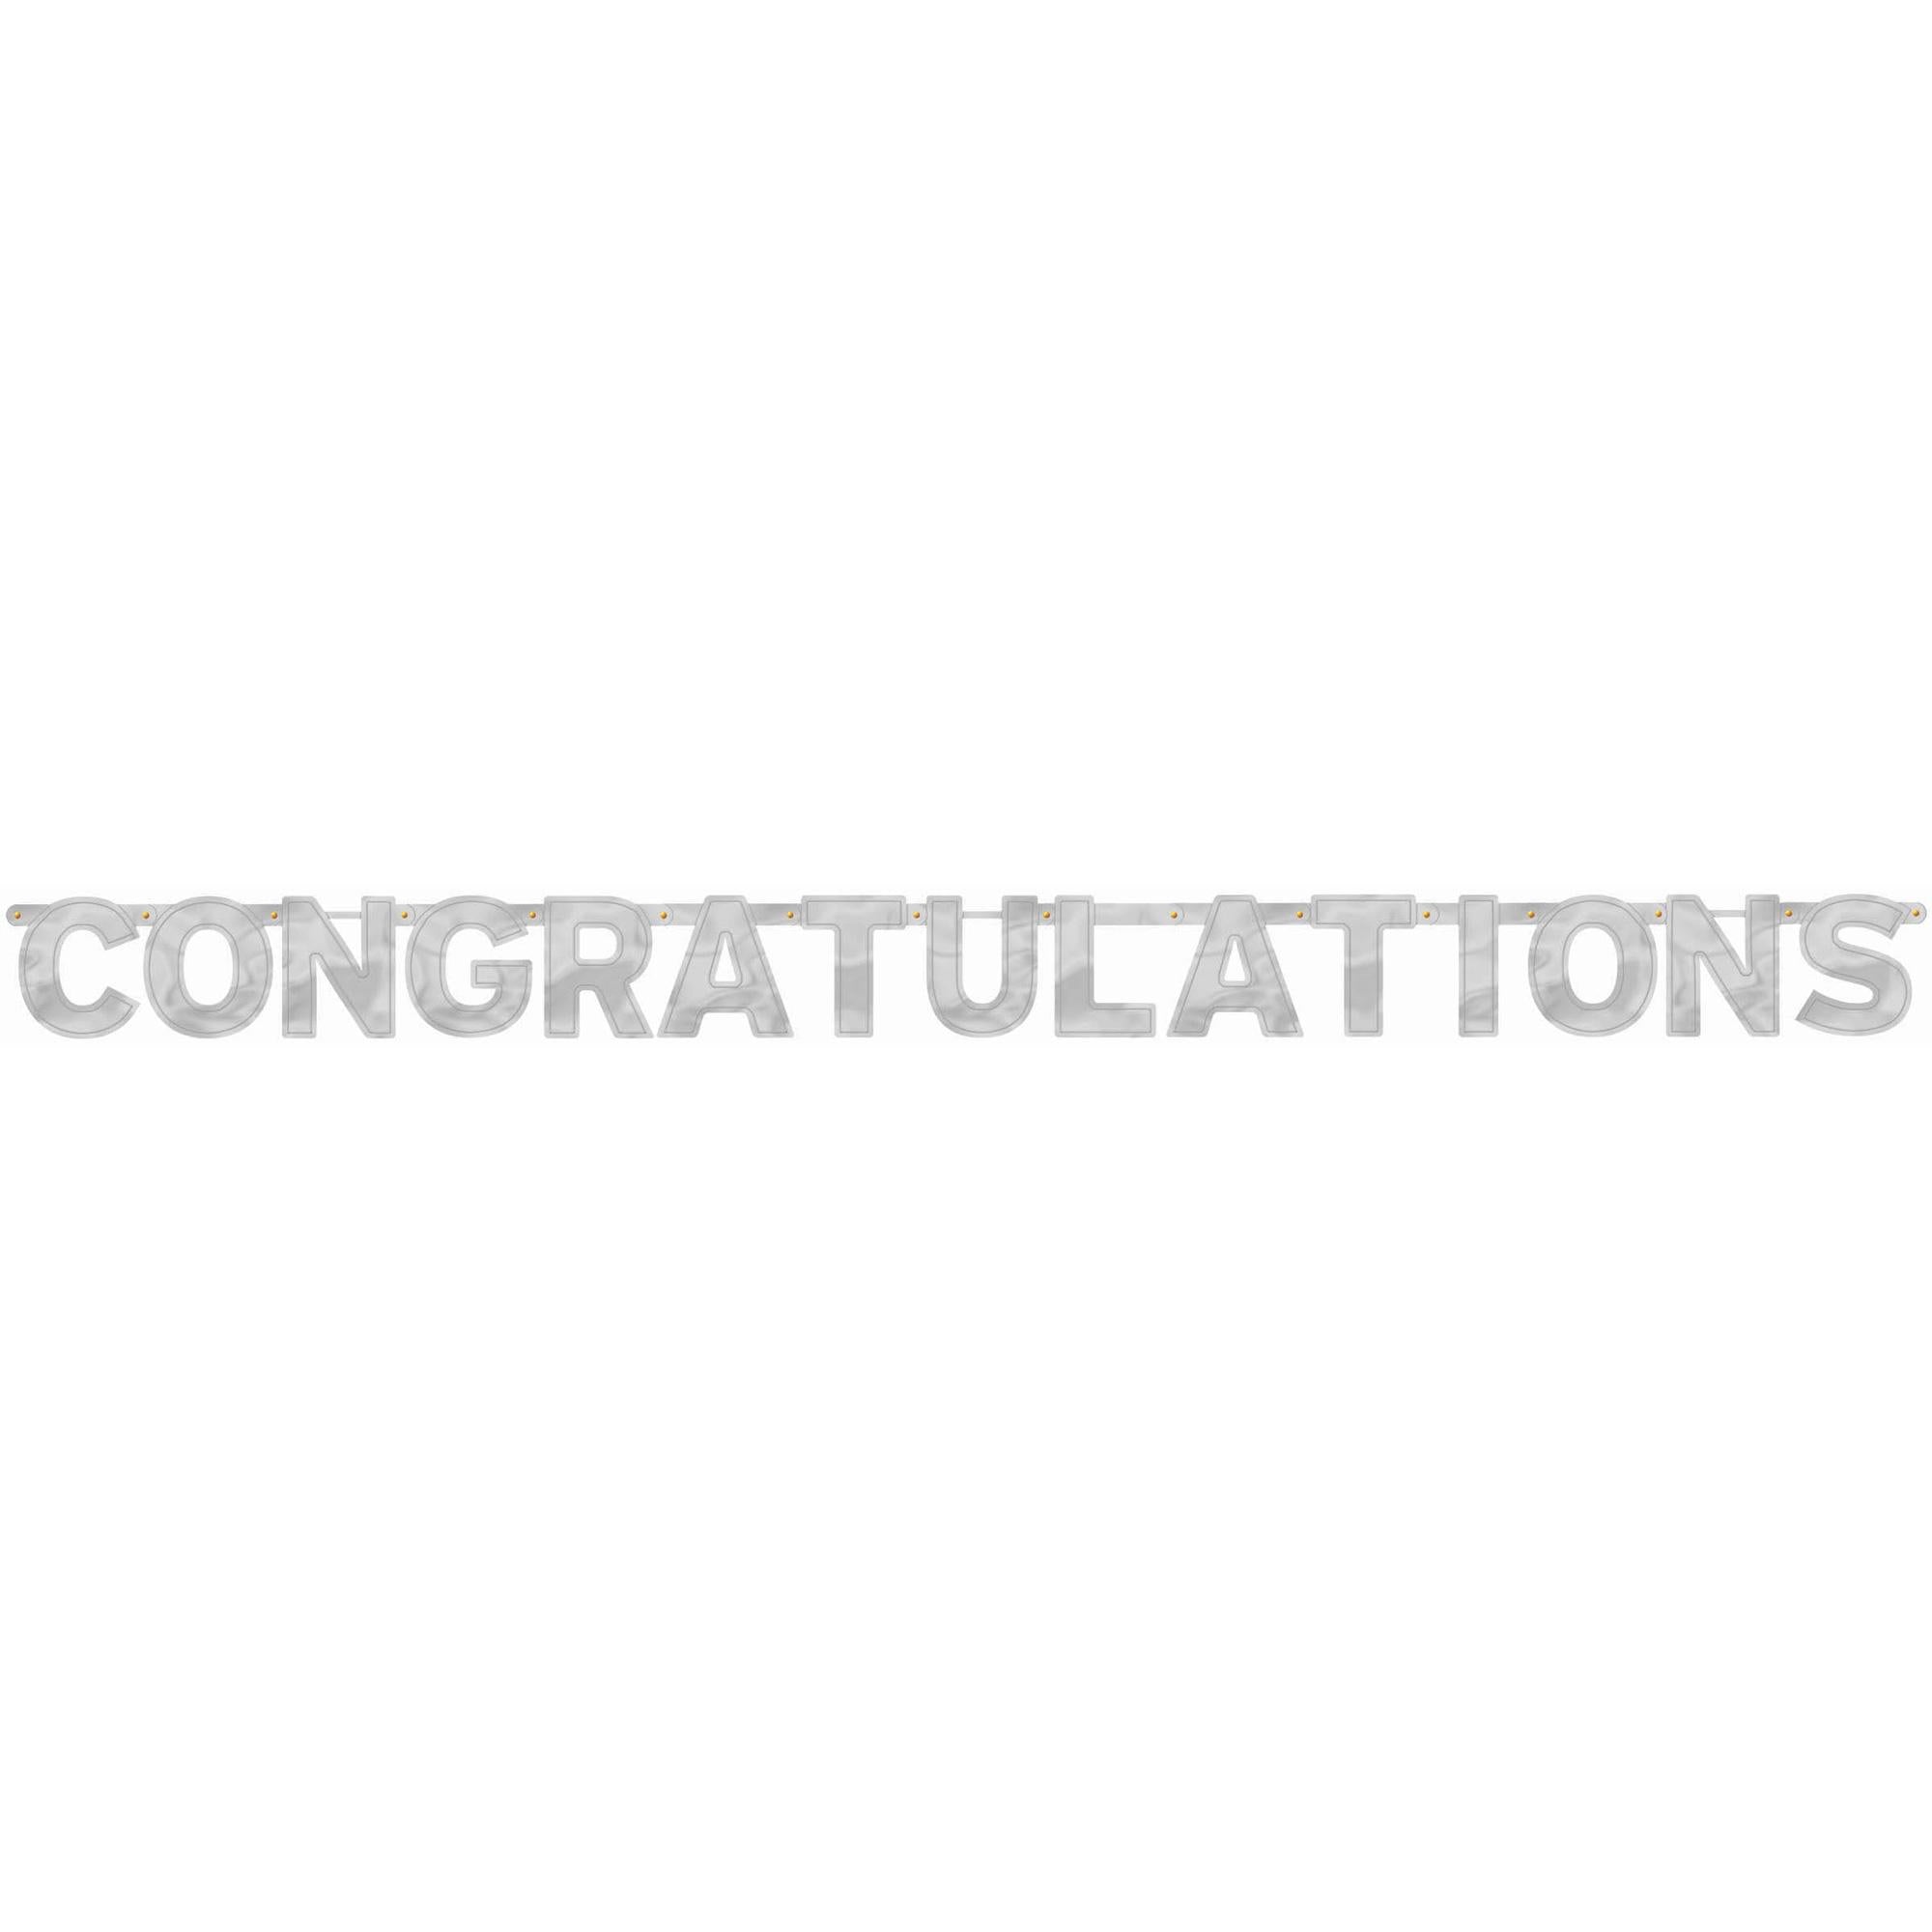 Congratulations Letter Banner 6.75 ft x 6.25in Decorations - Party Centre - Party Centre